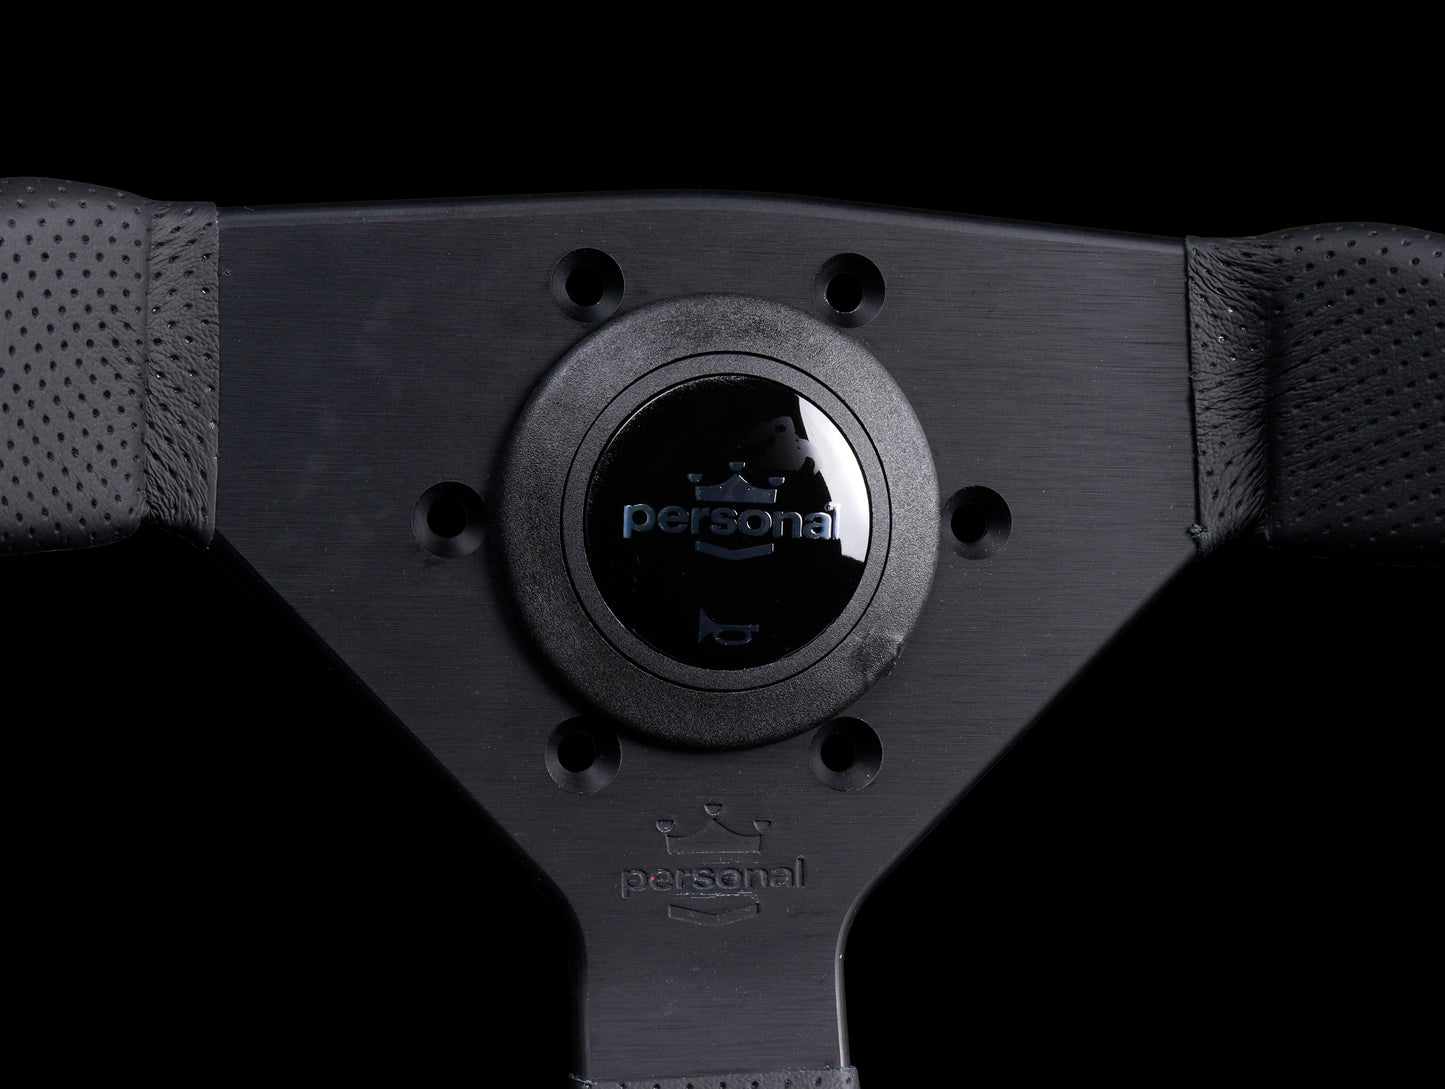 Personal Grinta 350mm Steering Wheel - Black Edition / Perforated Leather